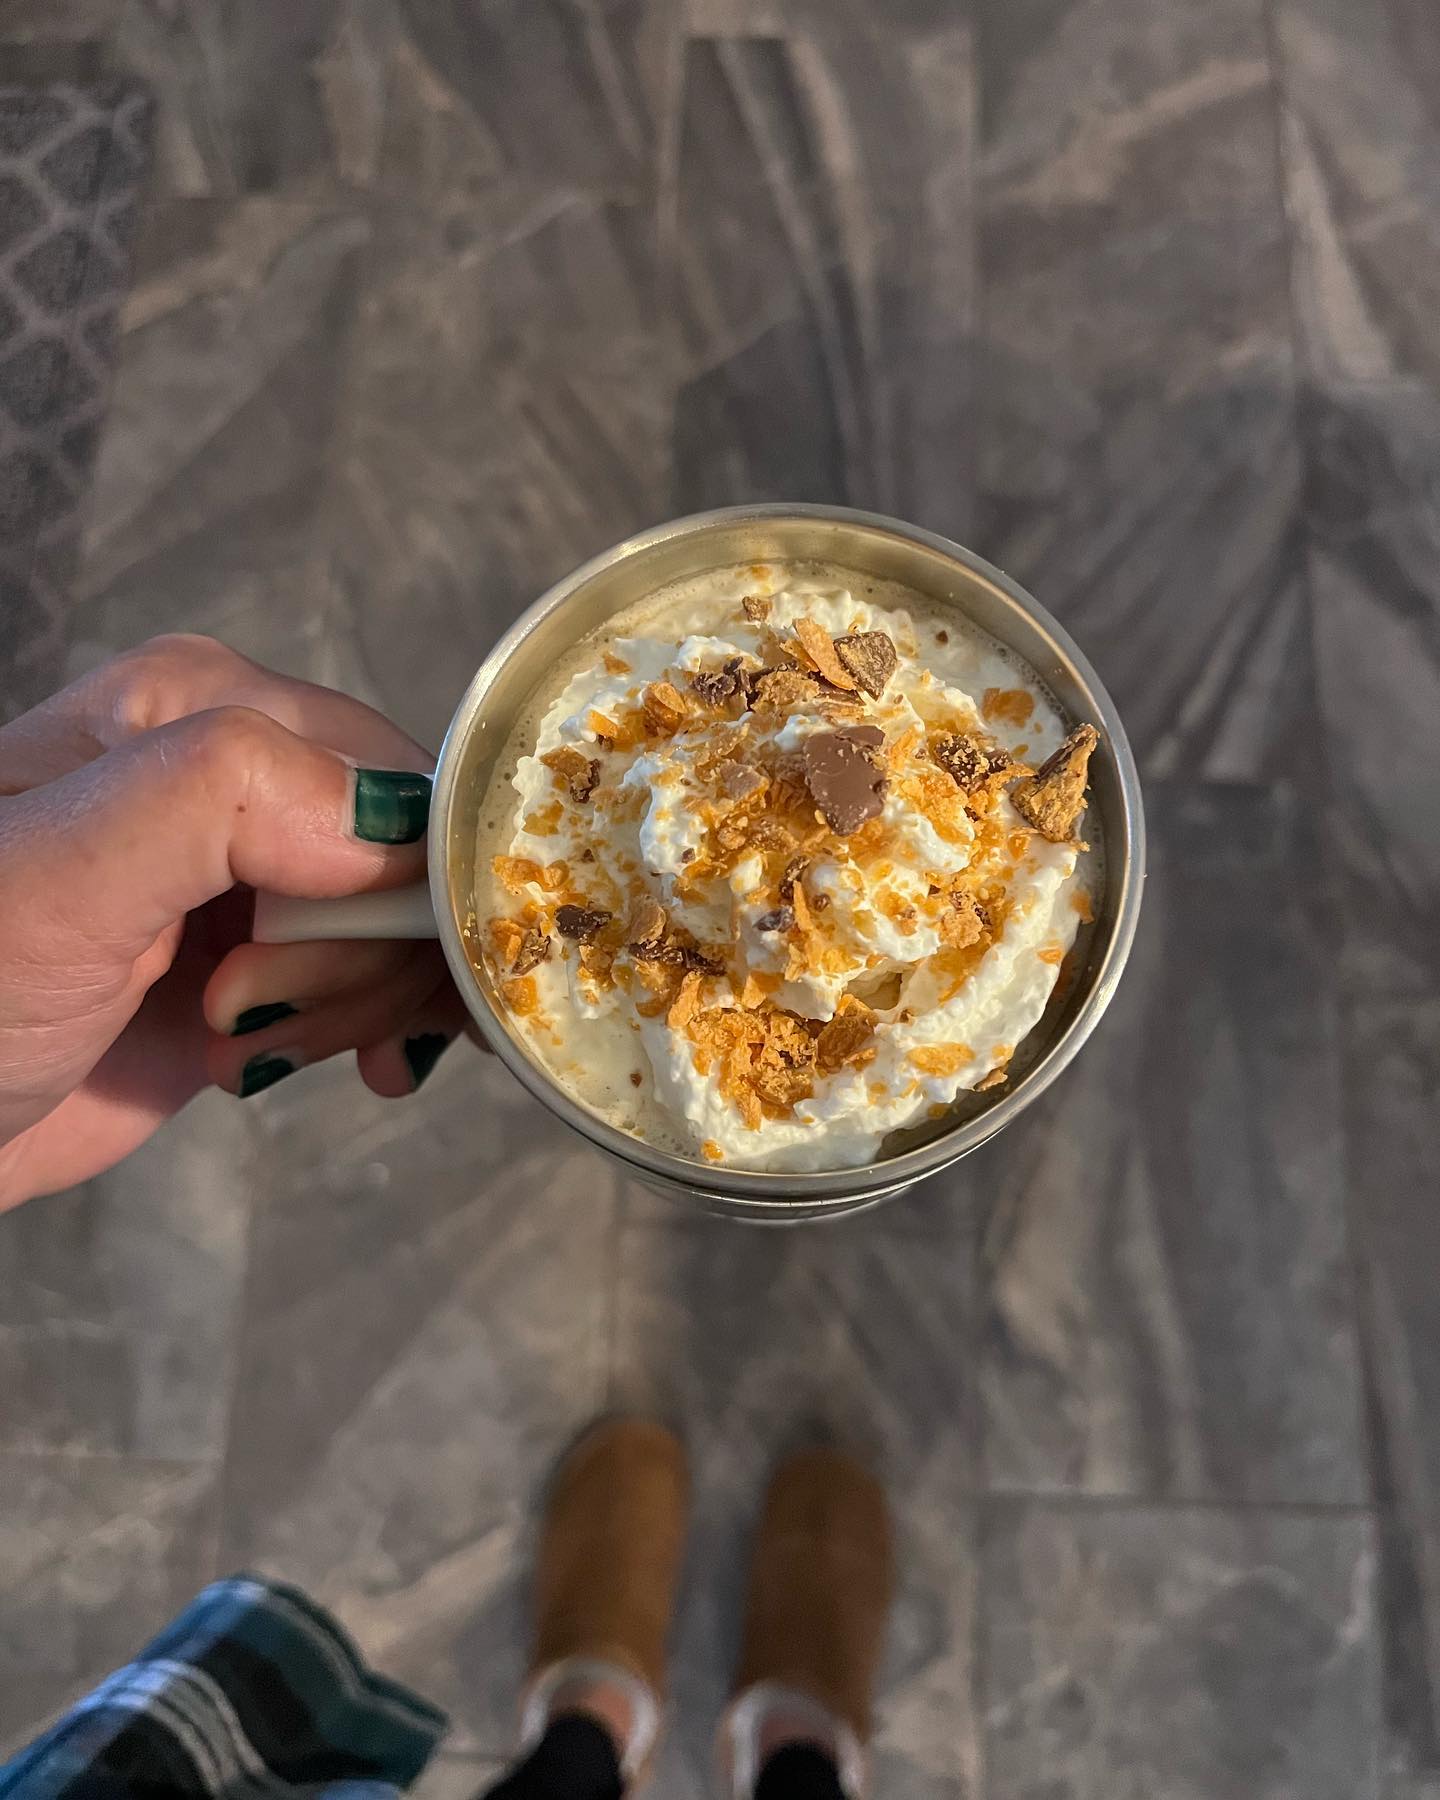 Butterfinger Latte anyone? Come see us at Riverfront tomorrow 9/1, plan to be set up by 7:45 staying till around 1!